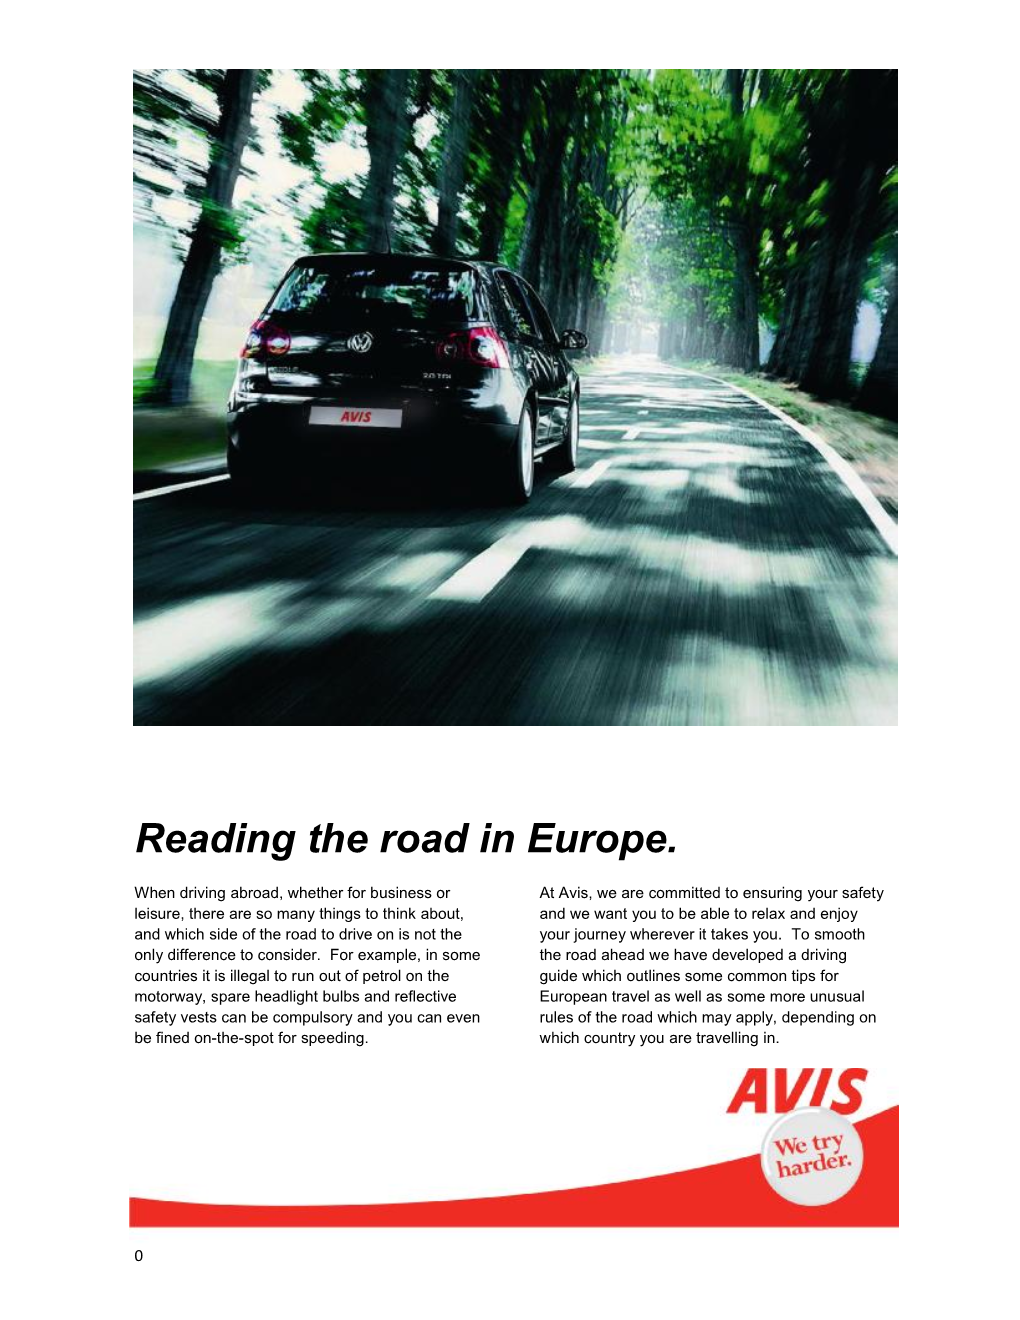 Reading the Road in Europe